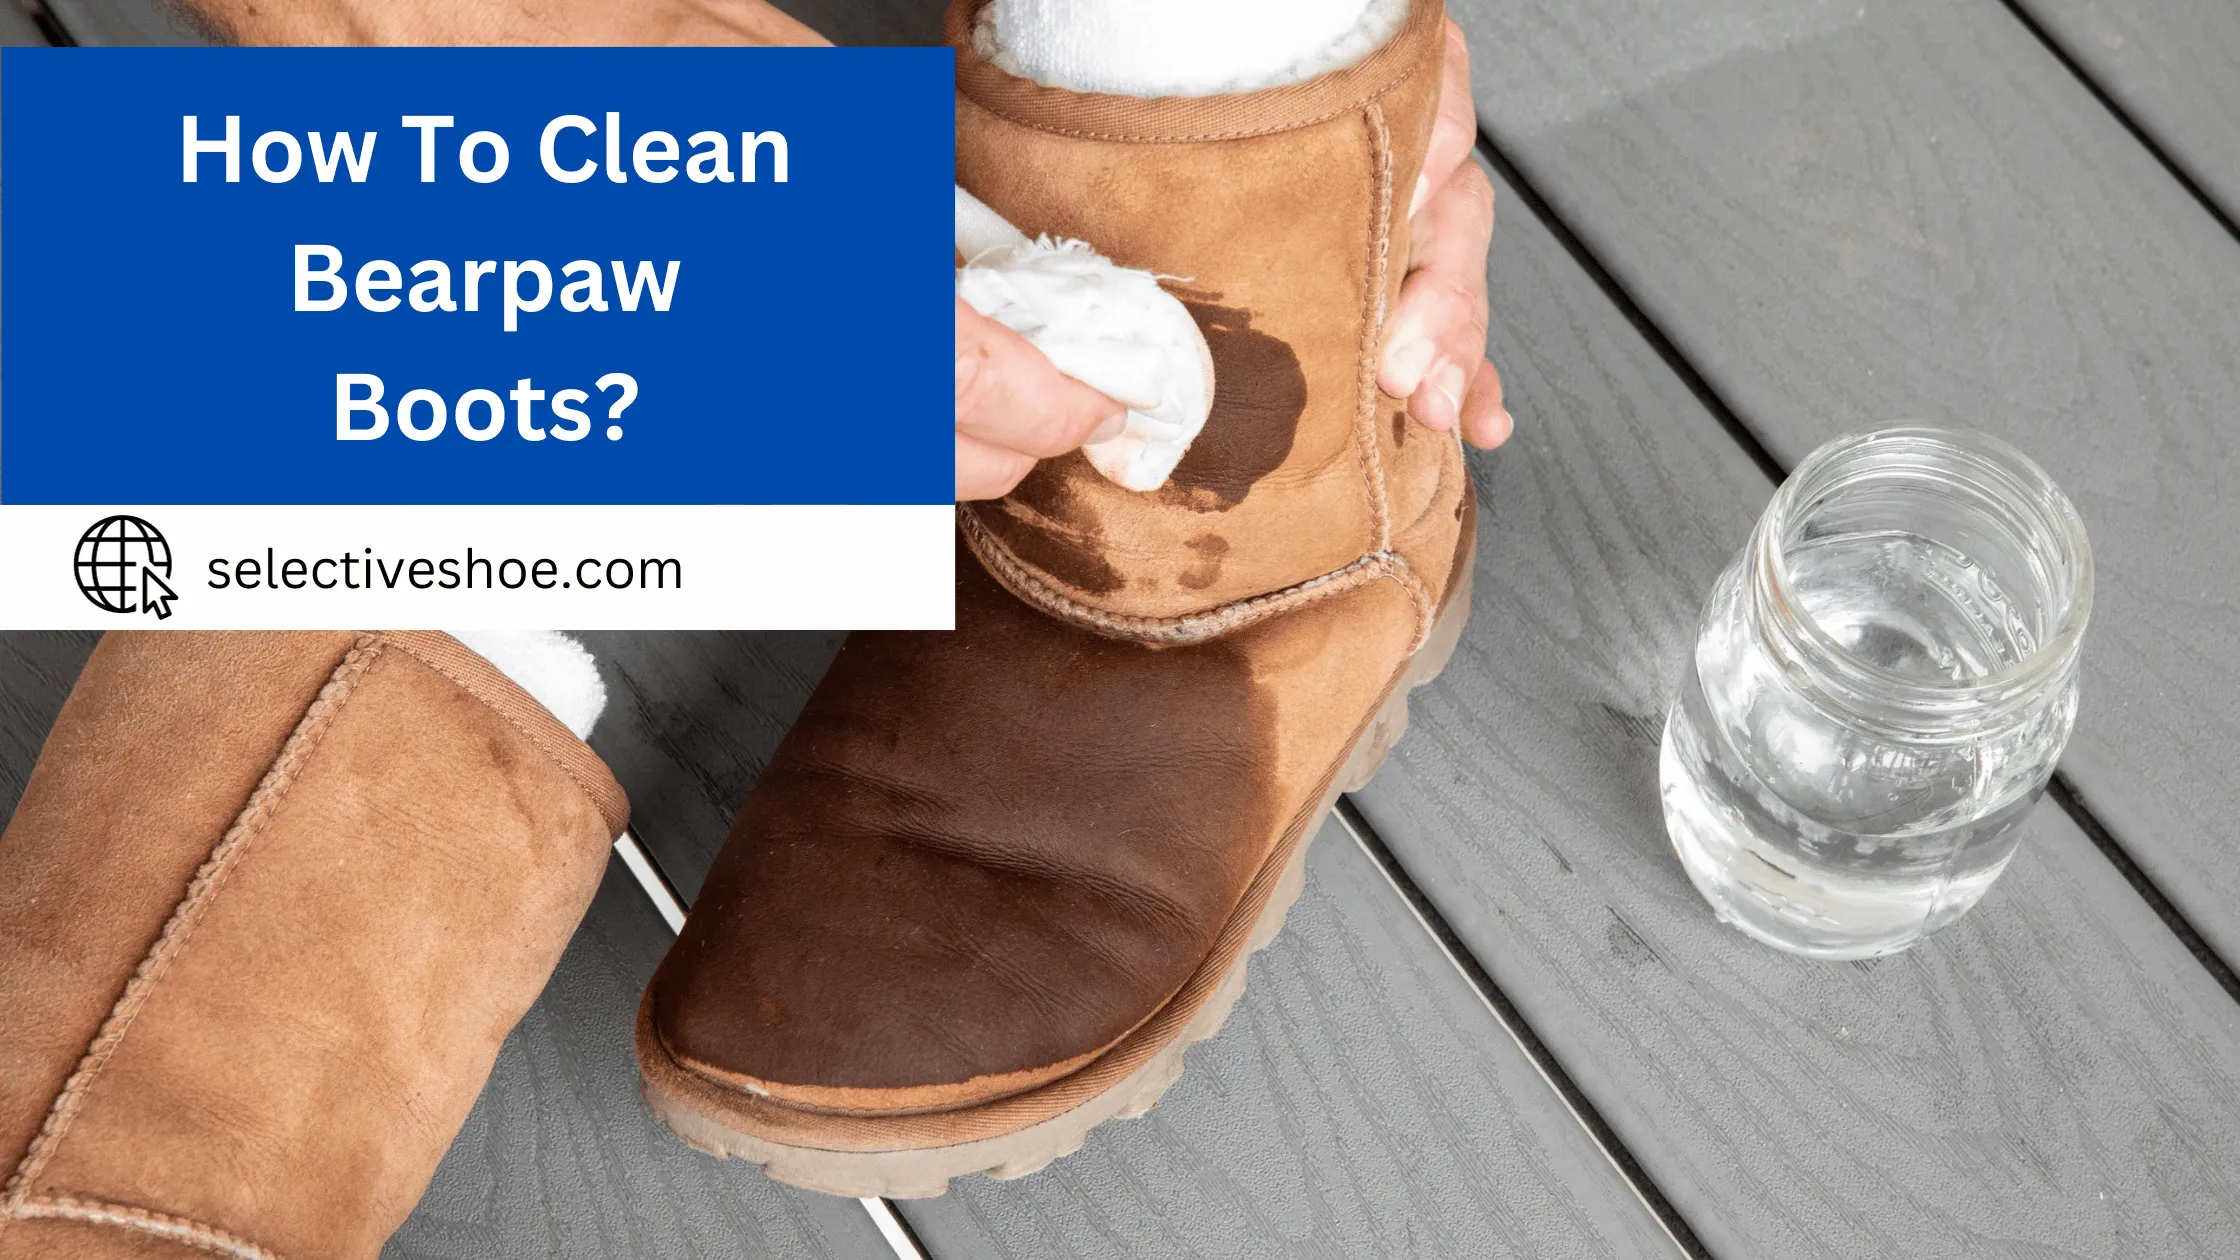 How To Clean Bearpaw Boots? Detailed Information